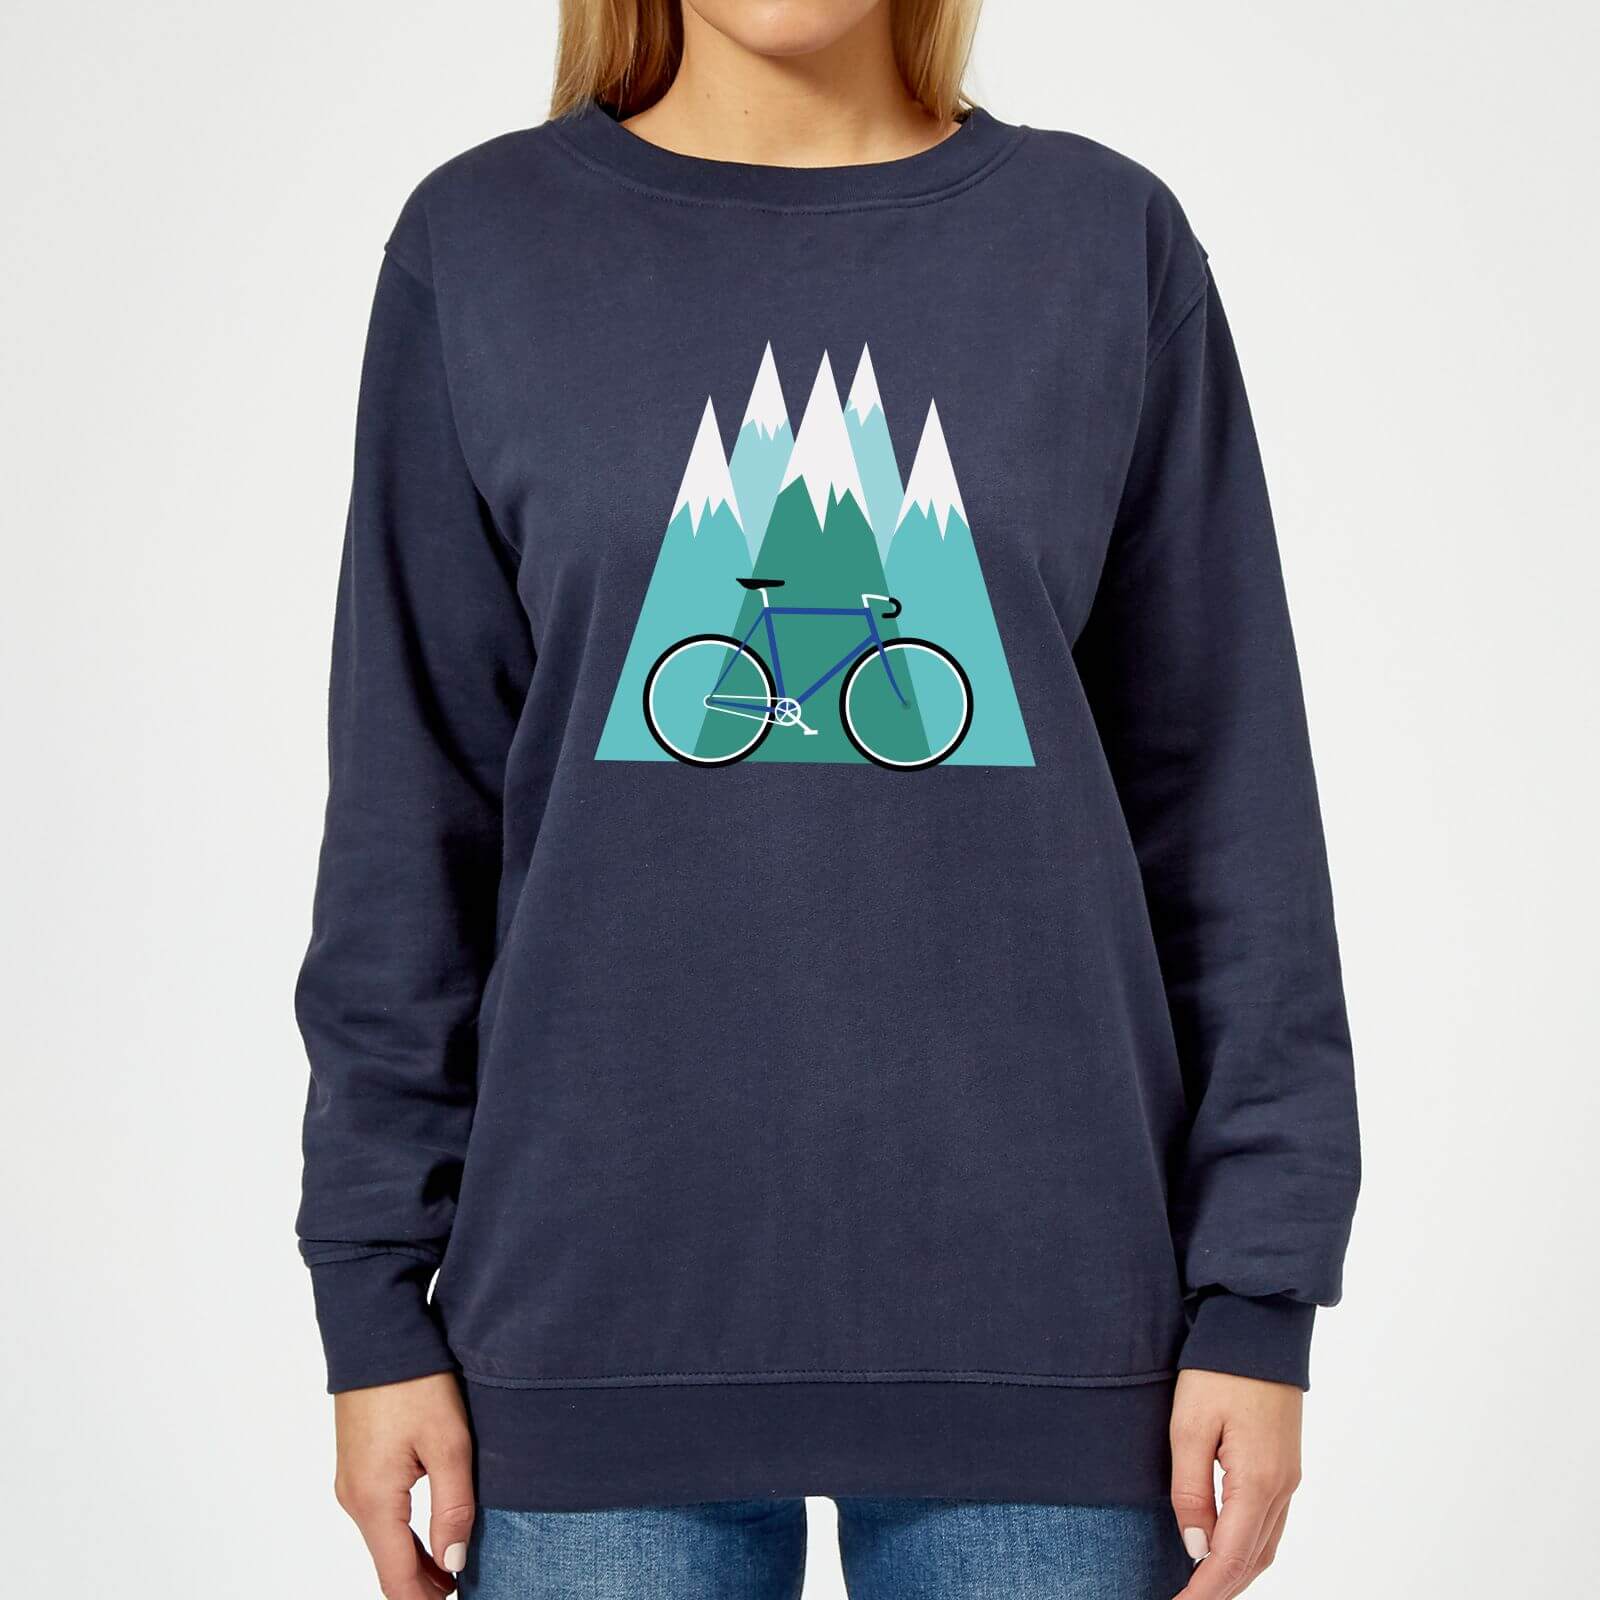 Bike and Mountains Women's Christmas Jumper - Navy - S - Navy